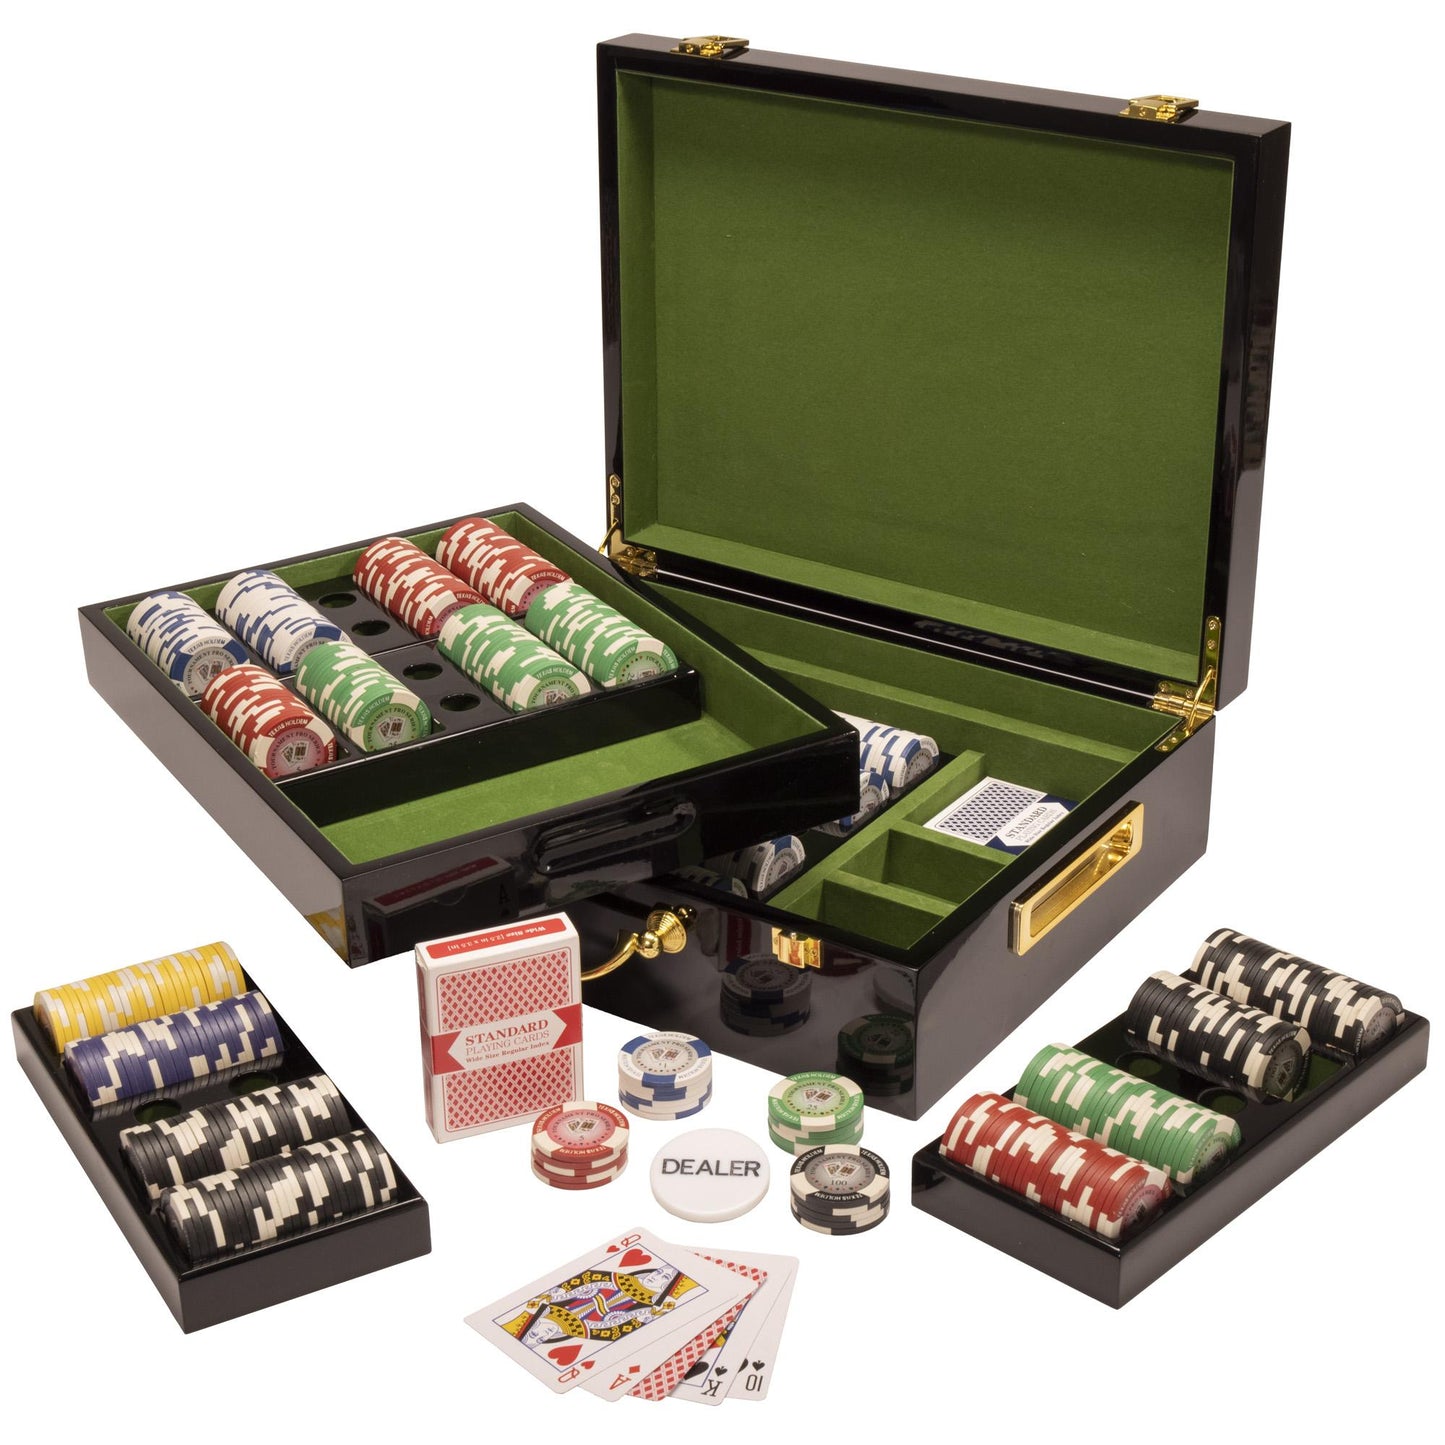 500 Tournament Pro Poker Chips with Hi Gloss Case